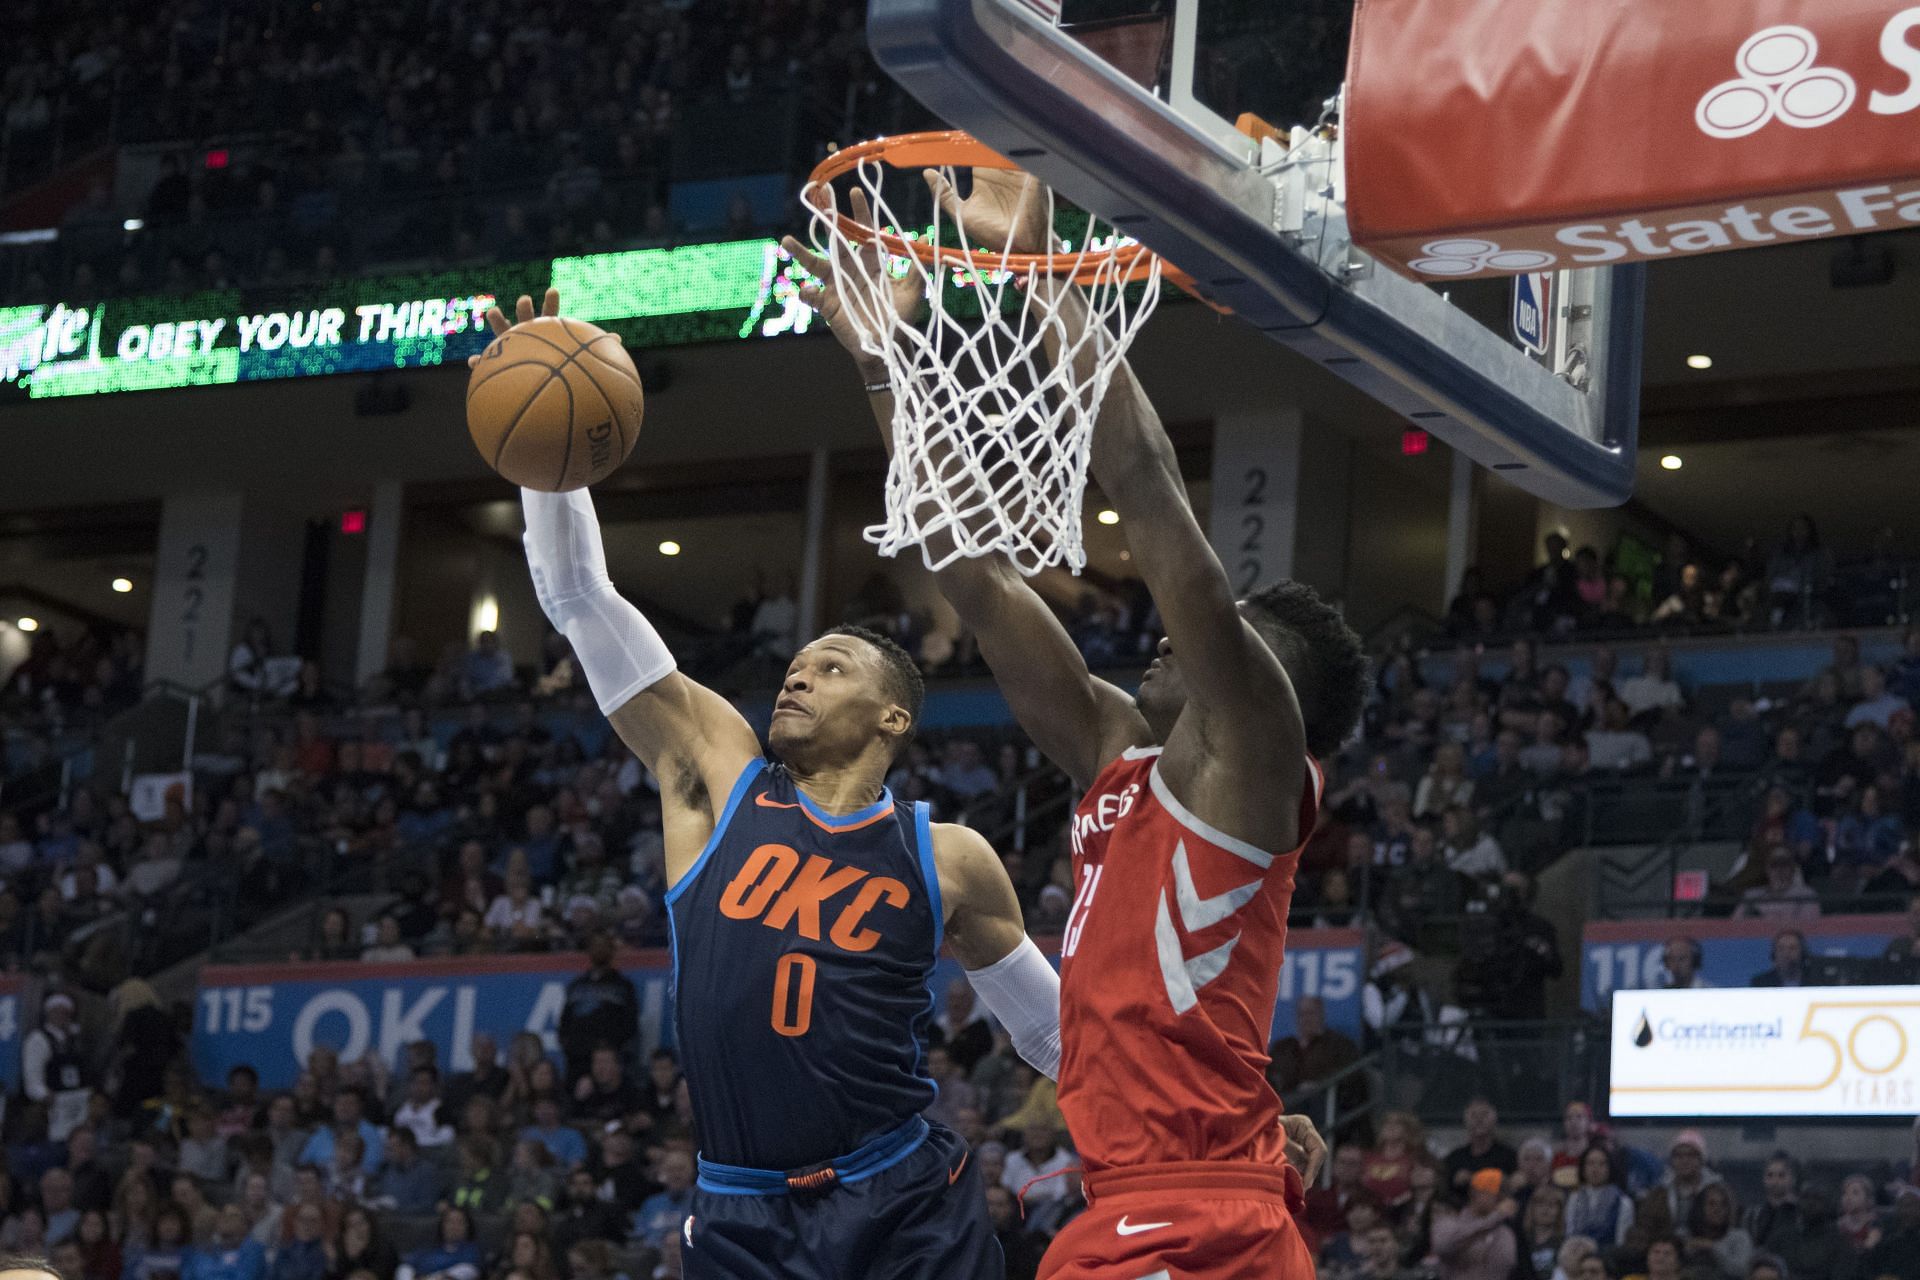 Russell Westbrook #0 of the Oklahoma City Thunder rebounds a ball after Clint Capela #15 of the Houston Rockets shot